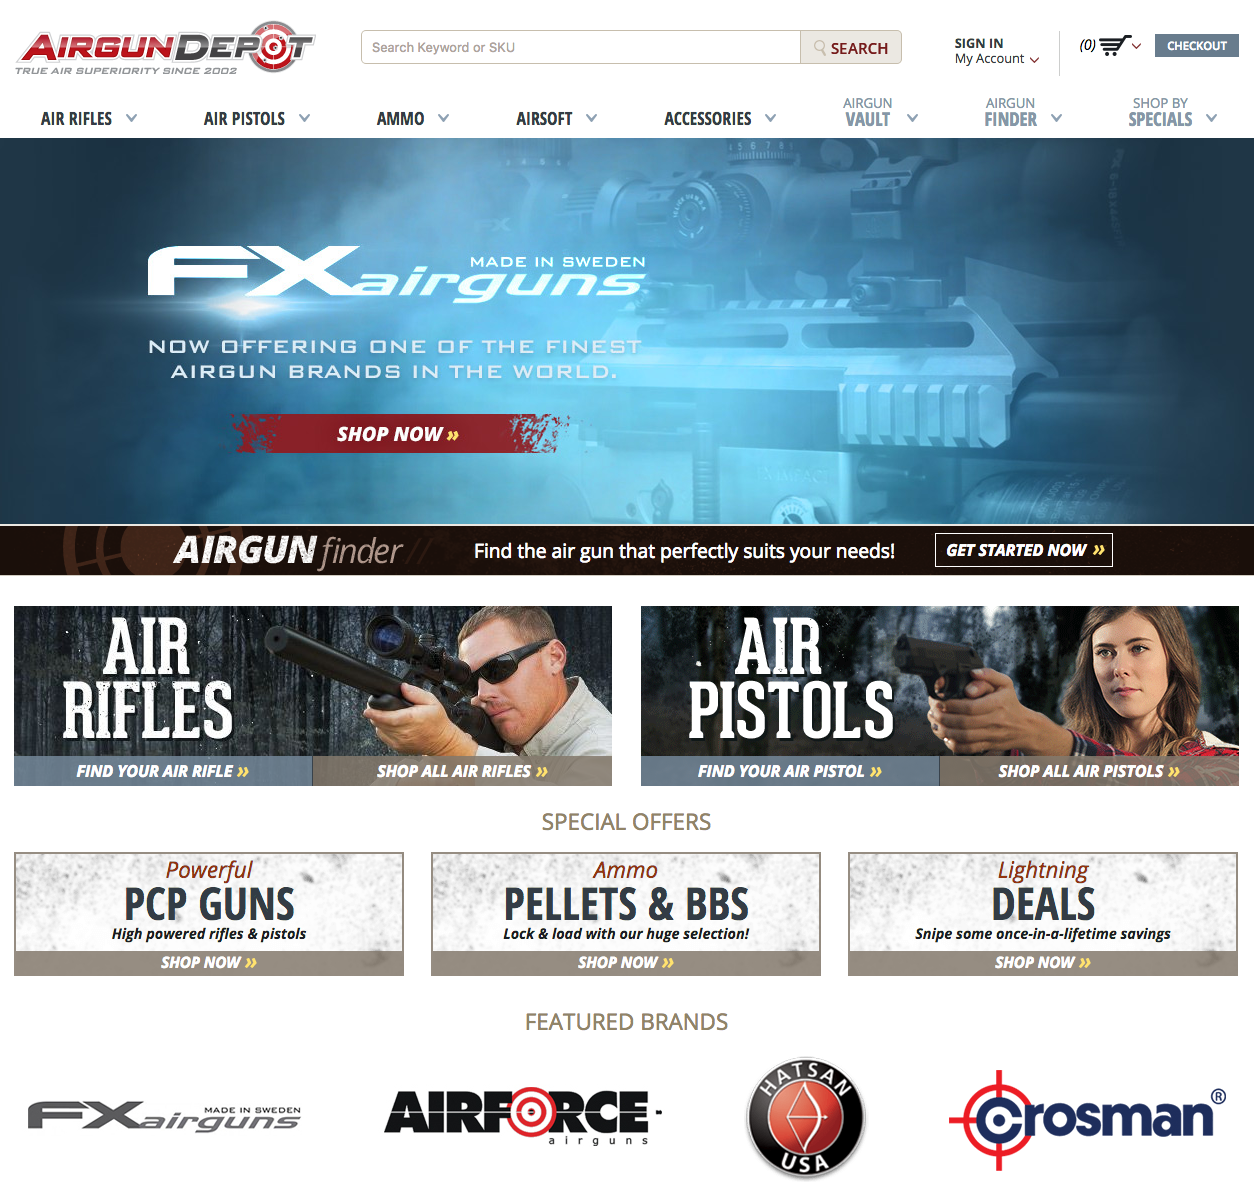 Airgun Depot Home Page